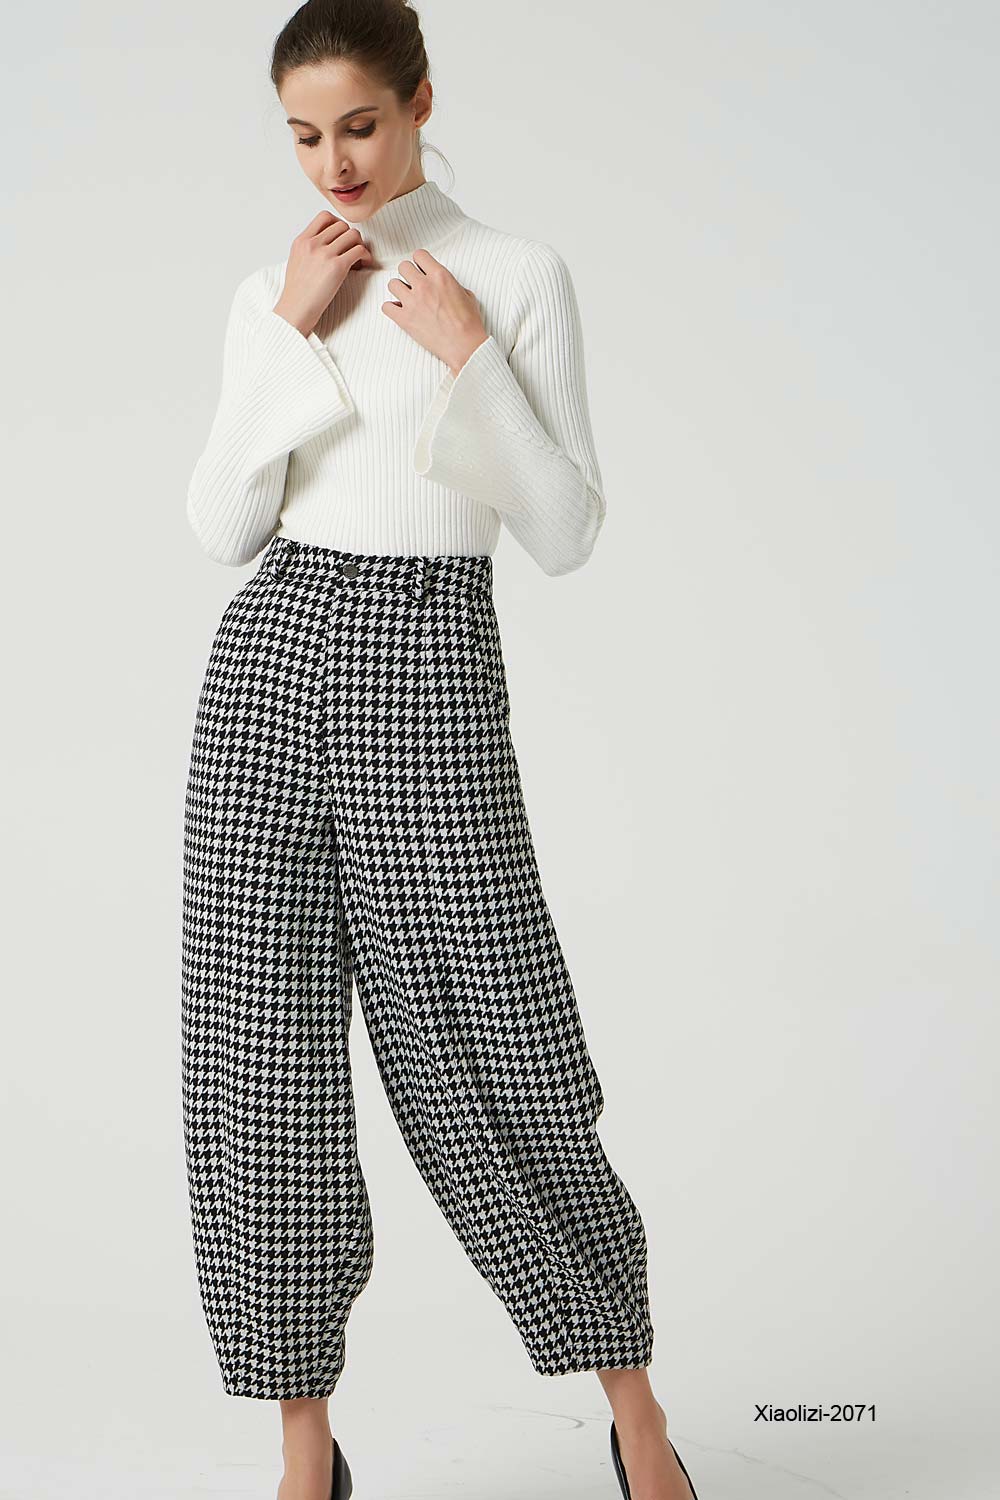 black and white wool pants, loose fitting baggy pants 2071# – XiaoLizi